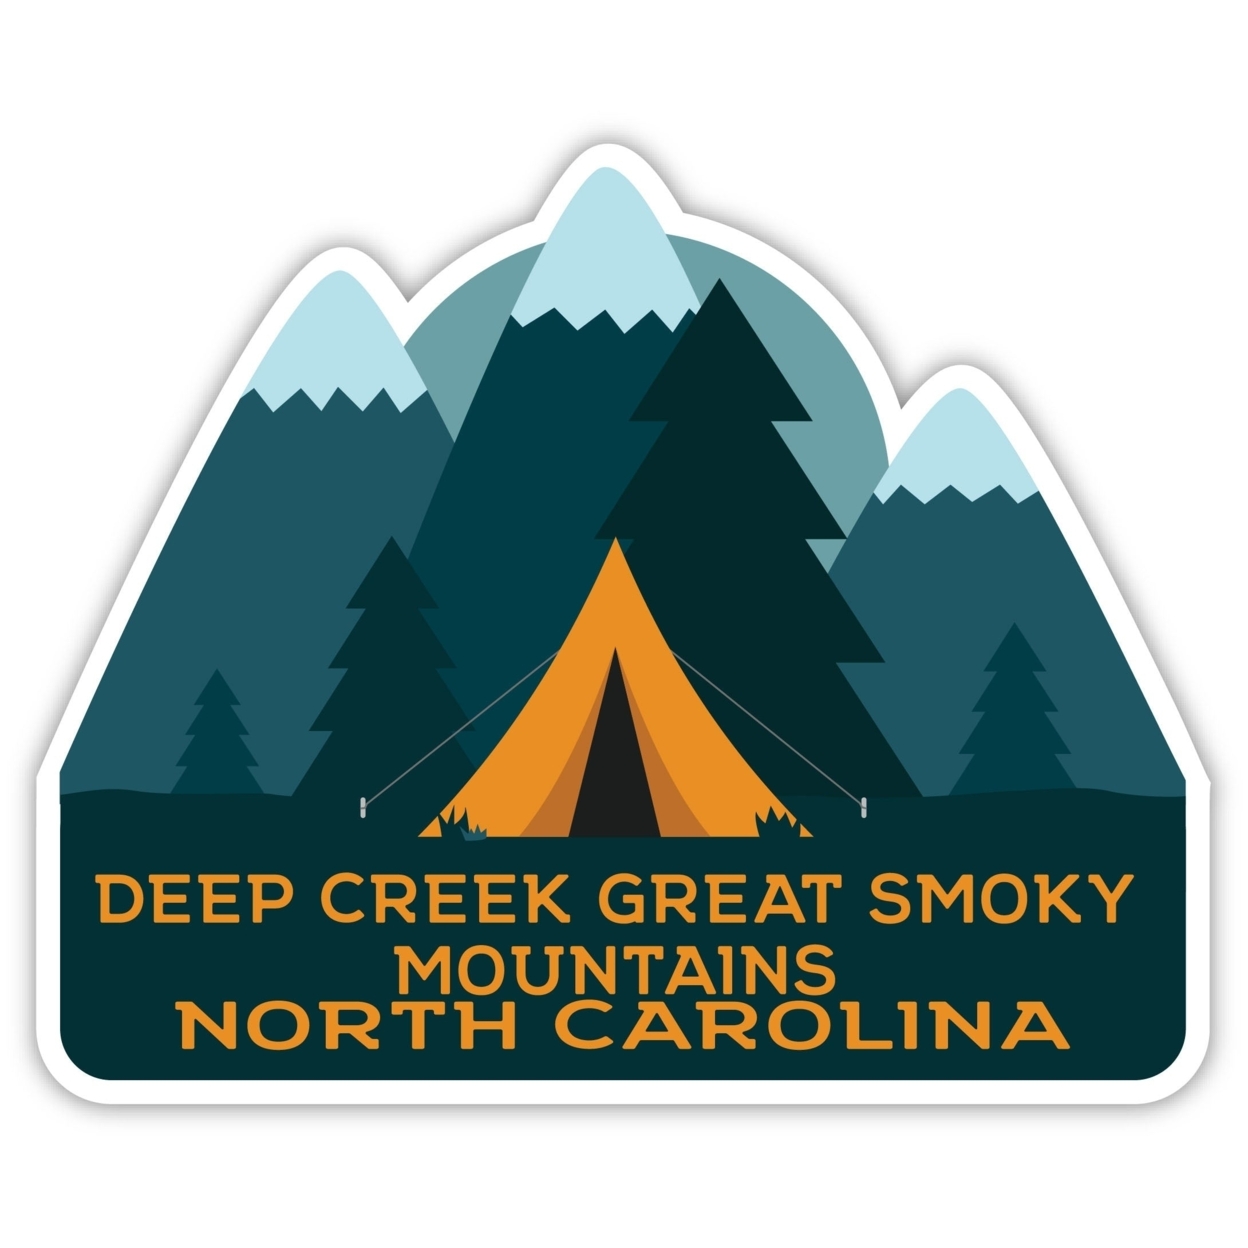 Deep Creek Great Smoky Mountains North Carolina Souvenir Decorative Stickers (Choose Theme And Size) - 4-Pack, 12-Inch, Tent